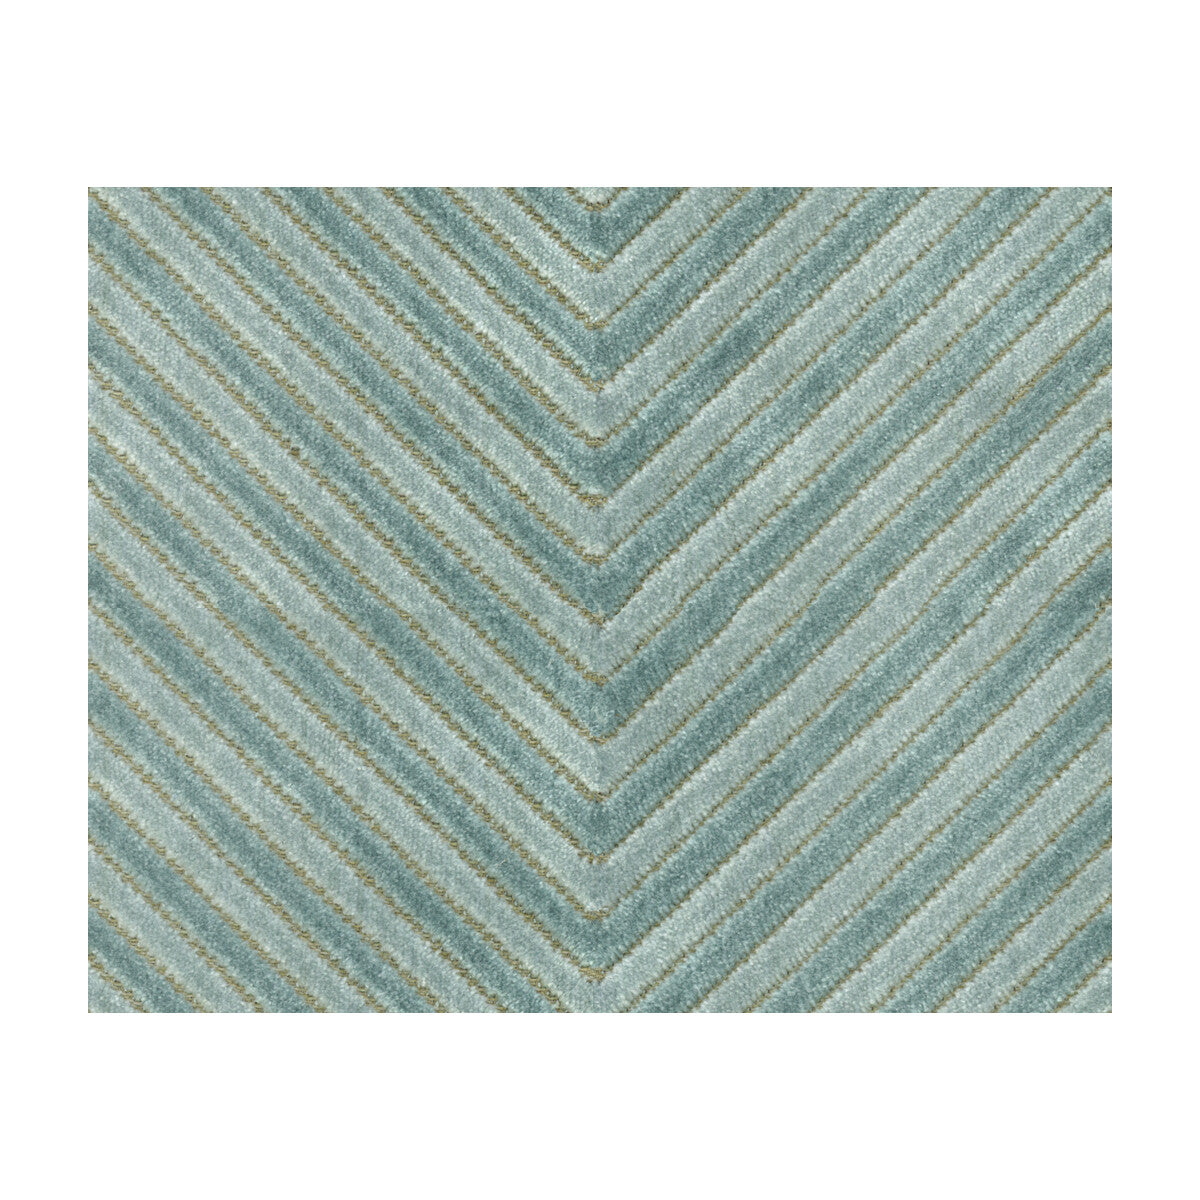 Zigandzag fabric in aqua color - pattern 34272.35.0 - by Kravet Basics in the Sarah Richardson Harmony collection